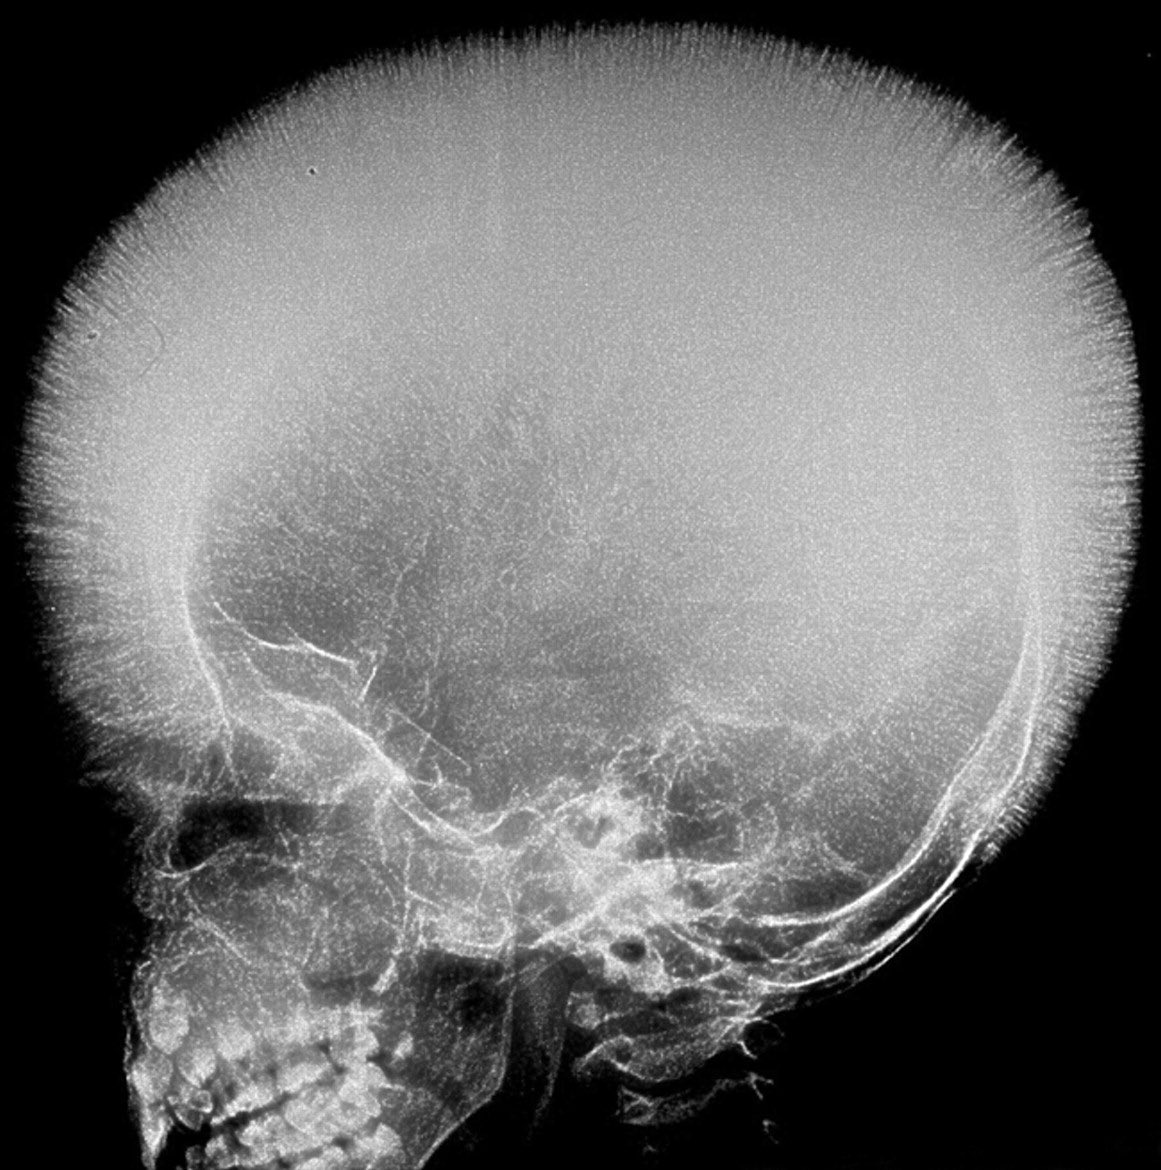 Hair-on-end appearance of the skull is usually seen in patients with thalassaemia and sickle cell anaemia due to chronic haemolysis. It results from accentuated vertical trabeculae between the inner and outer tables of the skull because of excessive bone marrow hyperplasia.